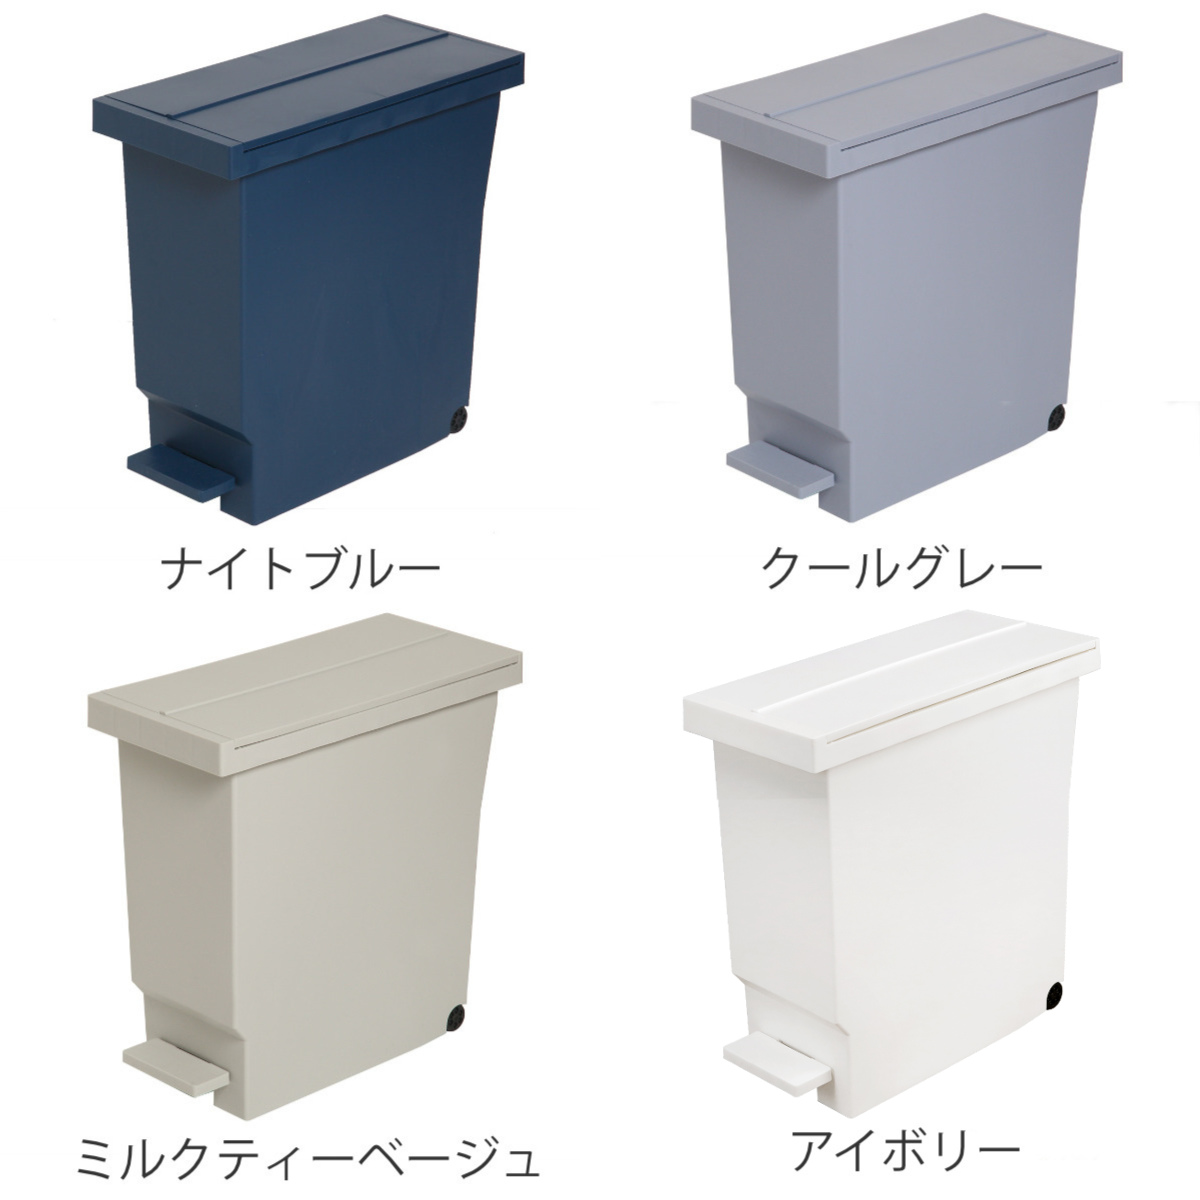  waste basket 32L butterfly pedal pale cover attaching ( 45L garbage bag correspondence 45 liter sack correspondence trash can 32 liter both opening shelves under counter under slim minute another )